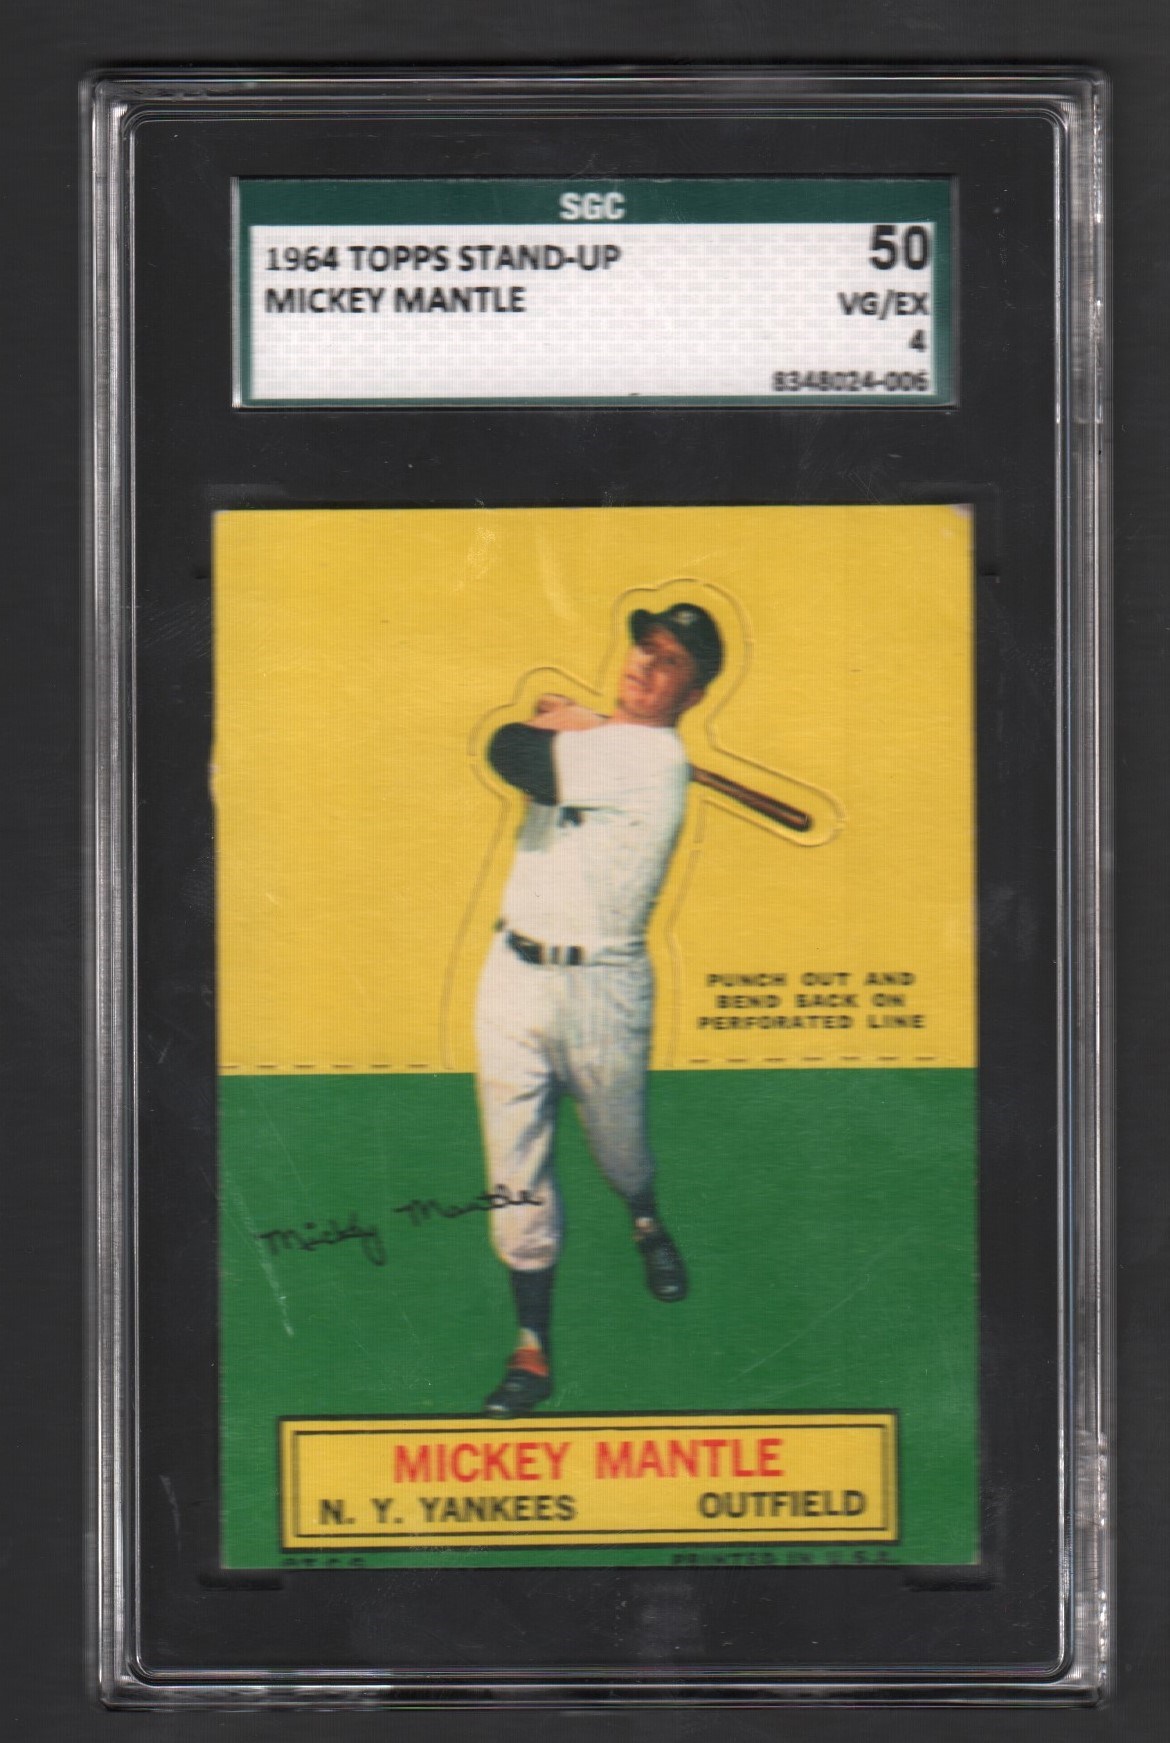 - 1964 Topps Stand Up Mickey Mantle - SGC 50 VG/EX 4